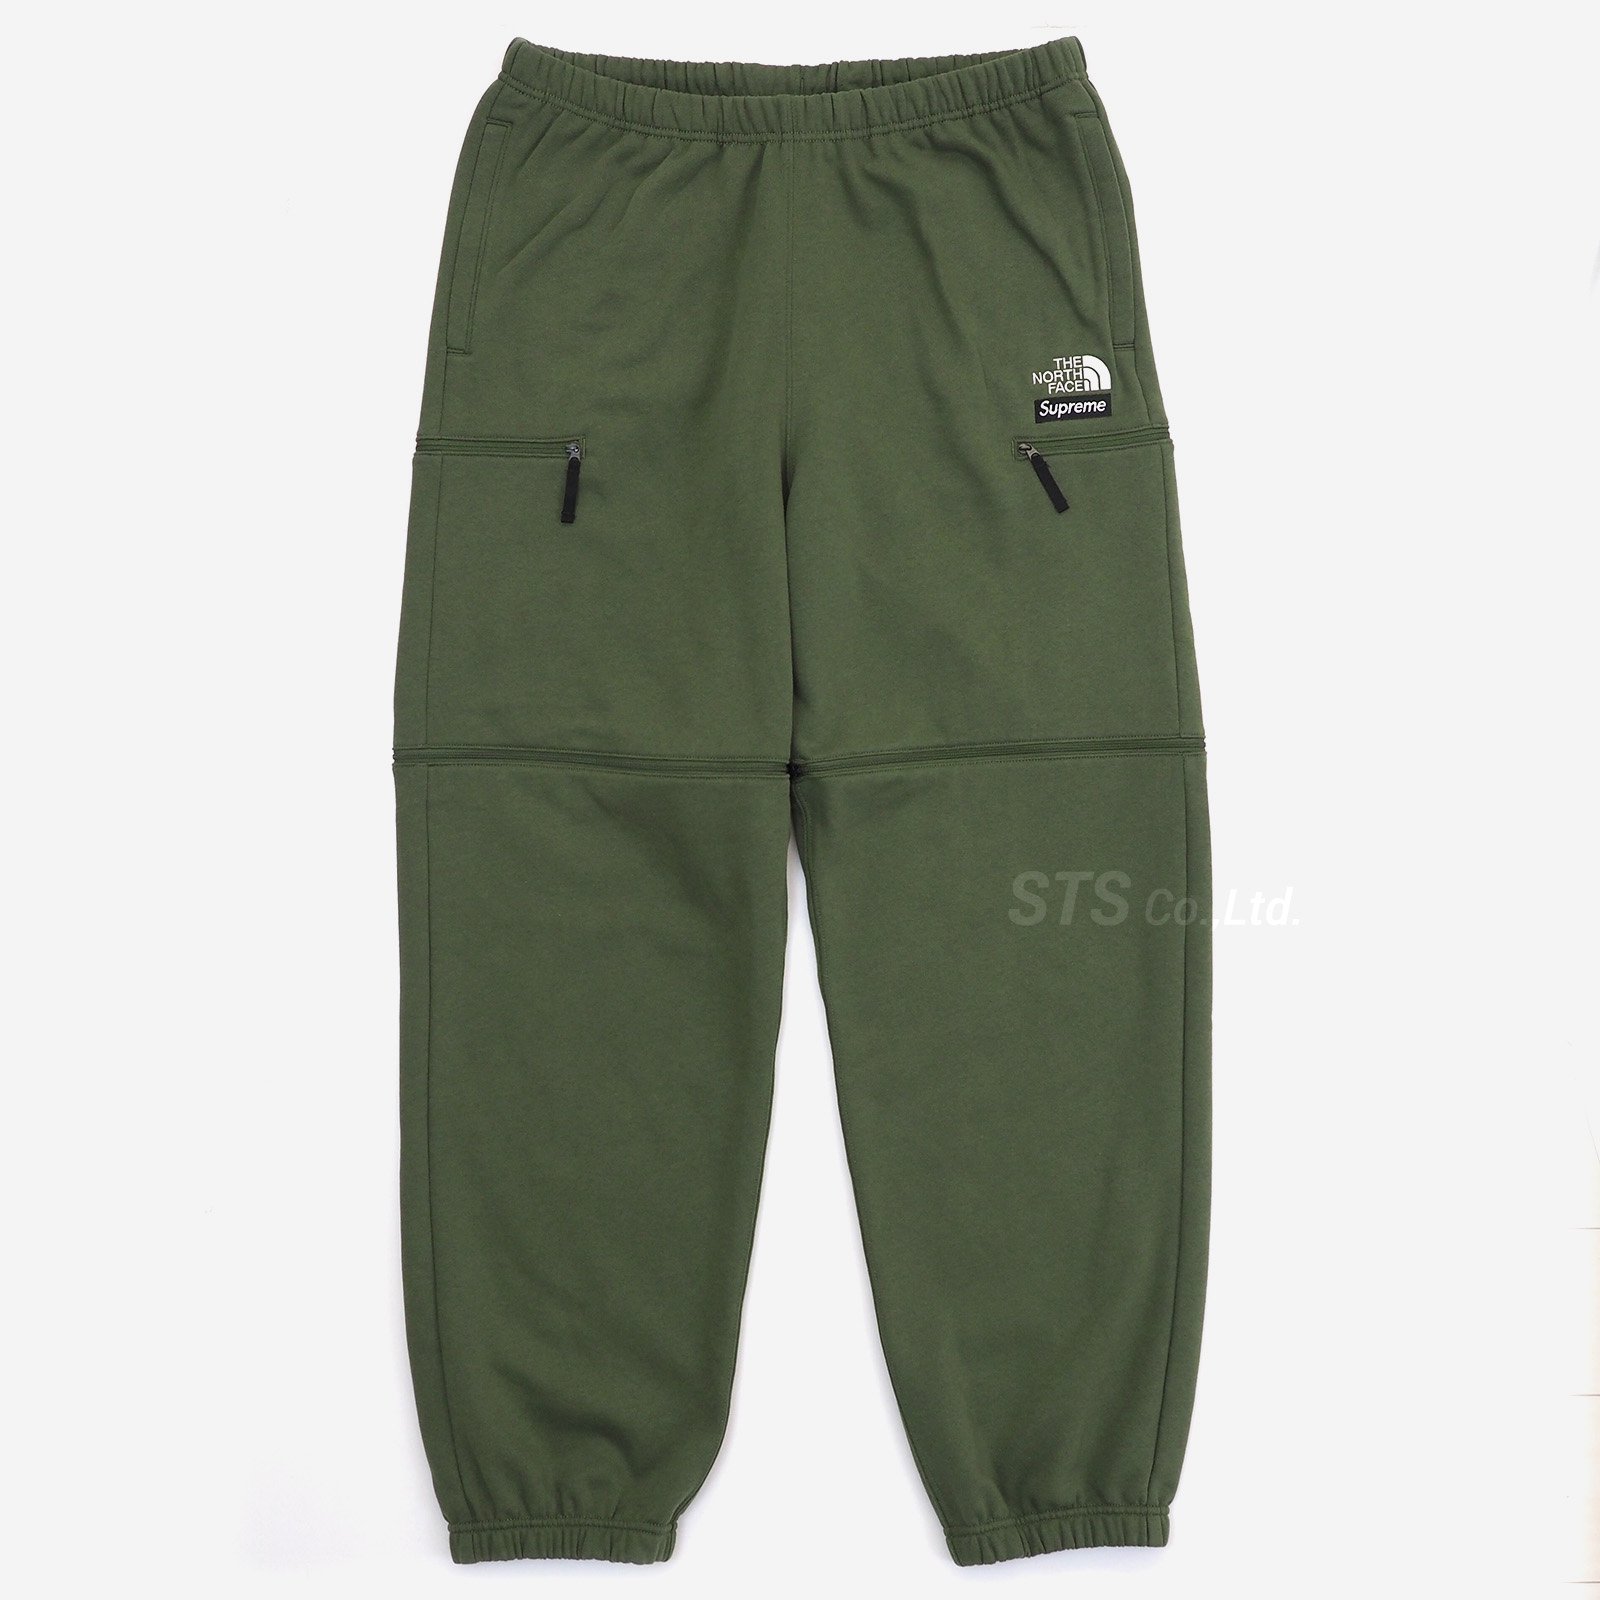 Supreme/The North Face Convertible Sweatpant - ParkSIDER